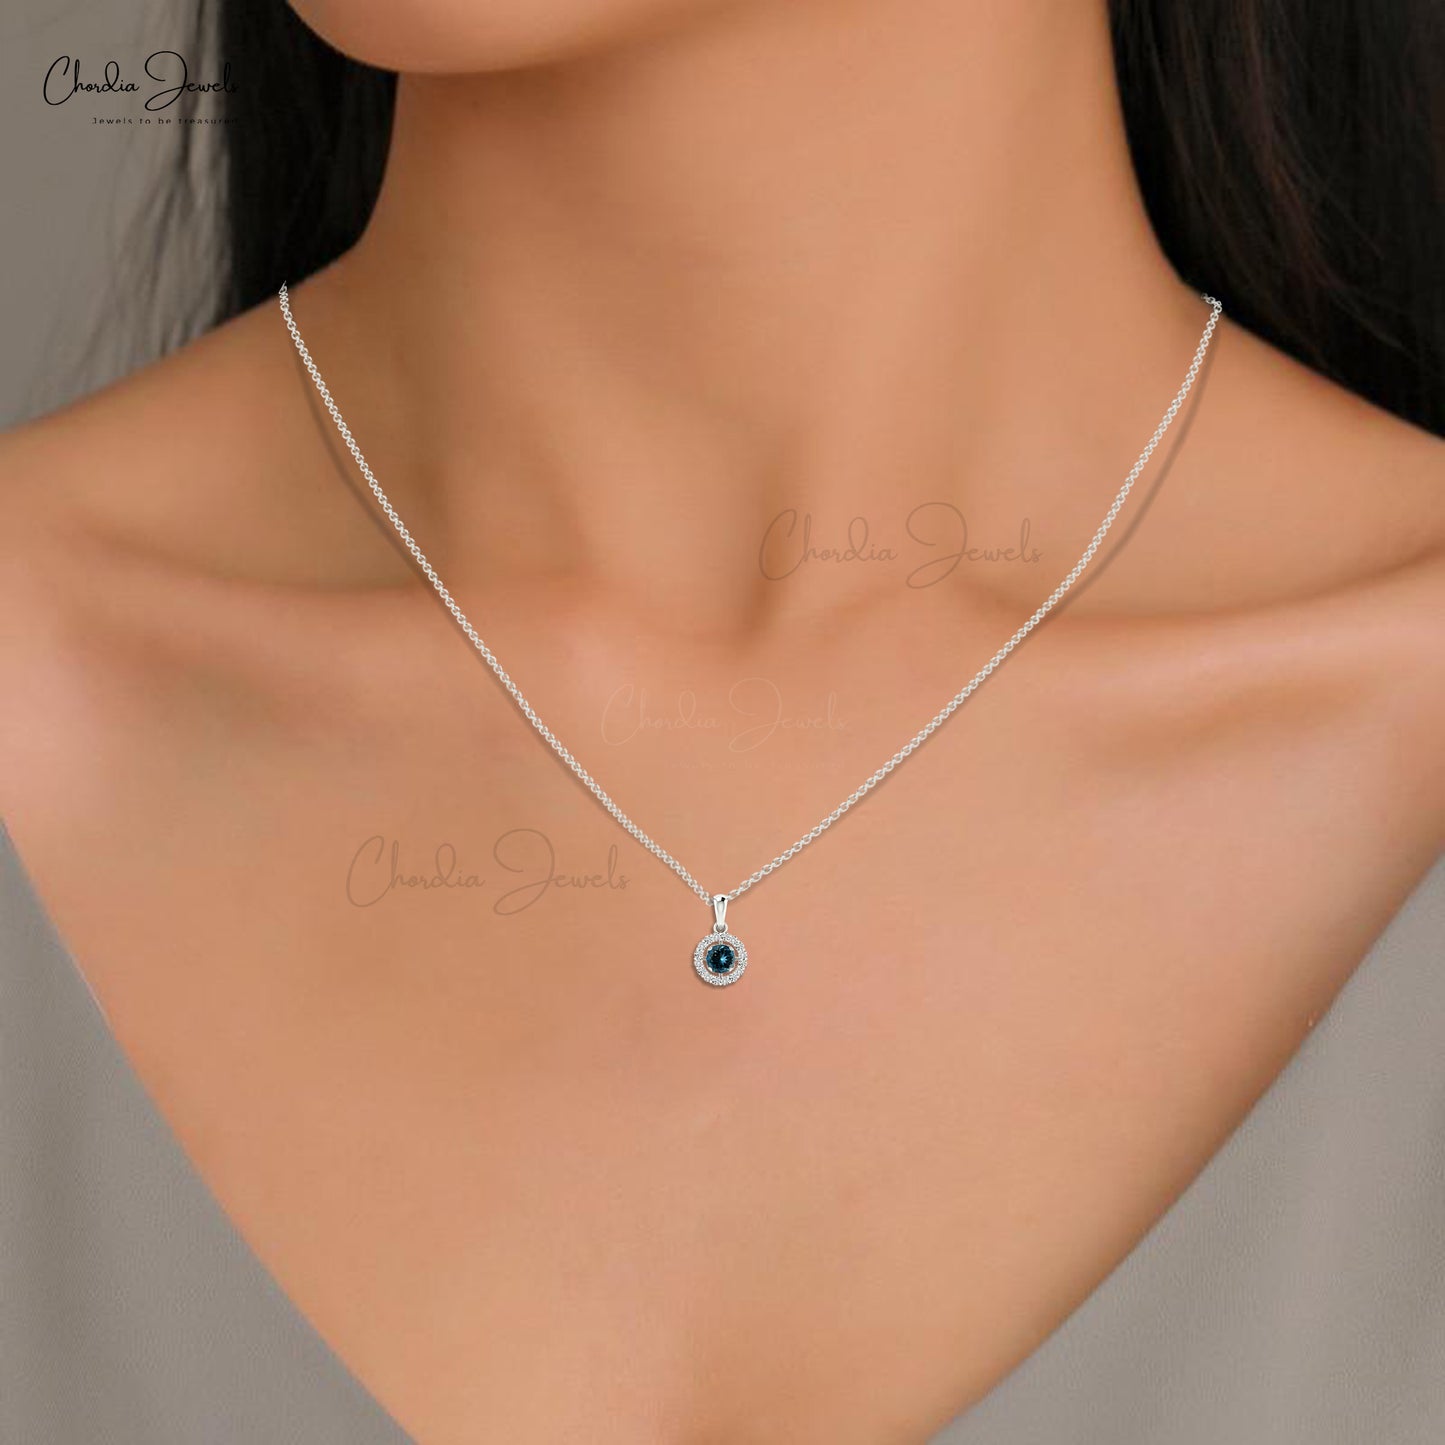 Load image into Gallery viewer, Classic Design Pure 14k Gold Natural White Diamond Halo Pendant Necklace December Birthstone London Blue Topaz Gemstone Pendant Gift For Her
